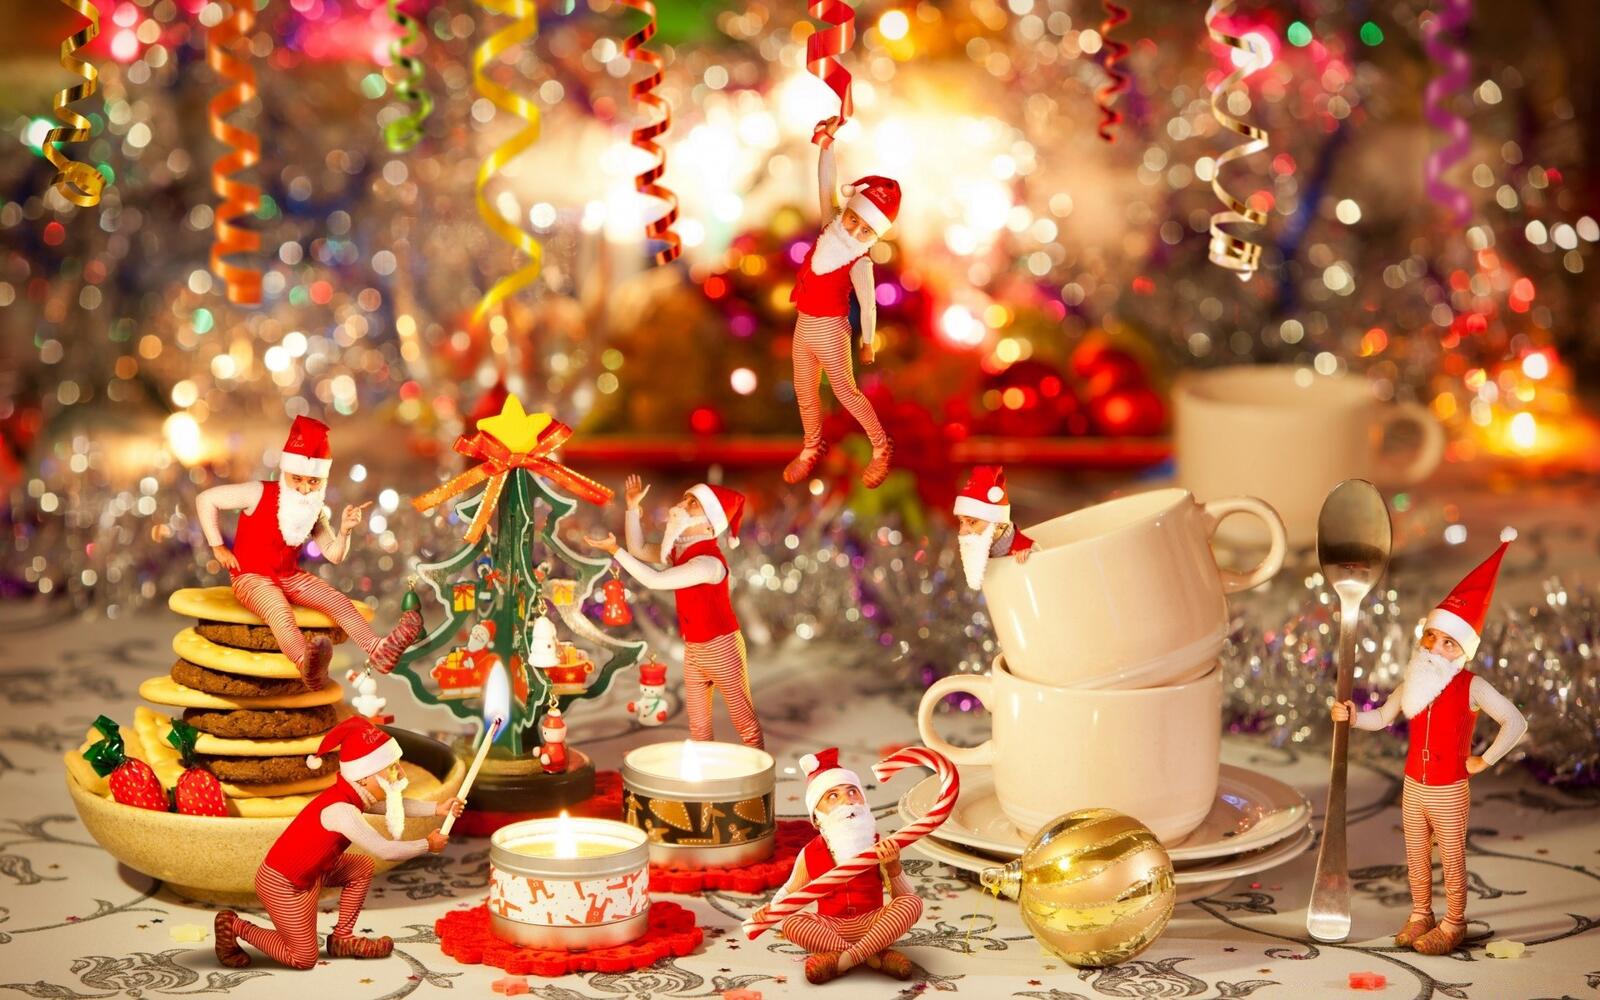 Wallpapers new year`s table new year atmosphere festive table on the desktop